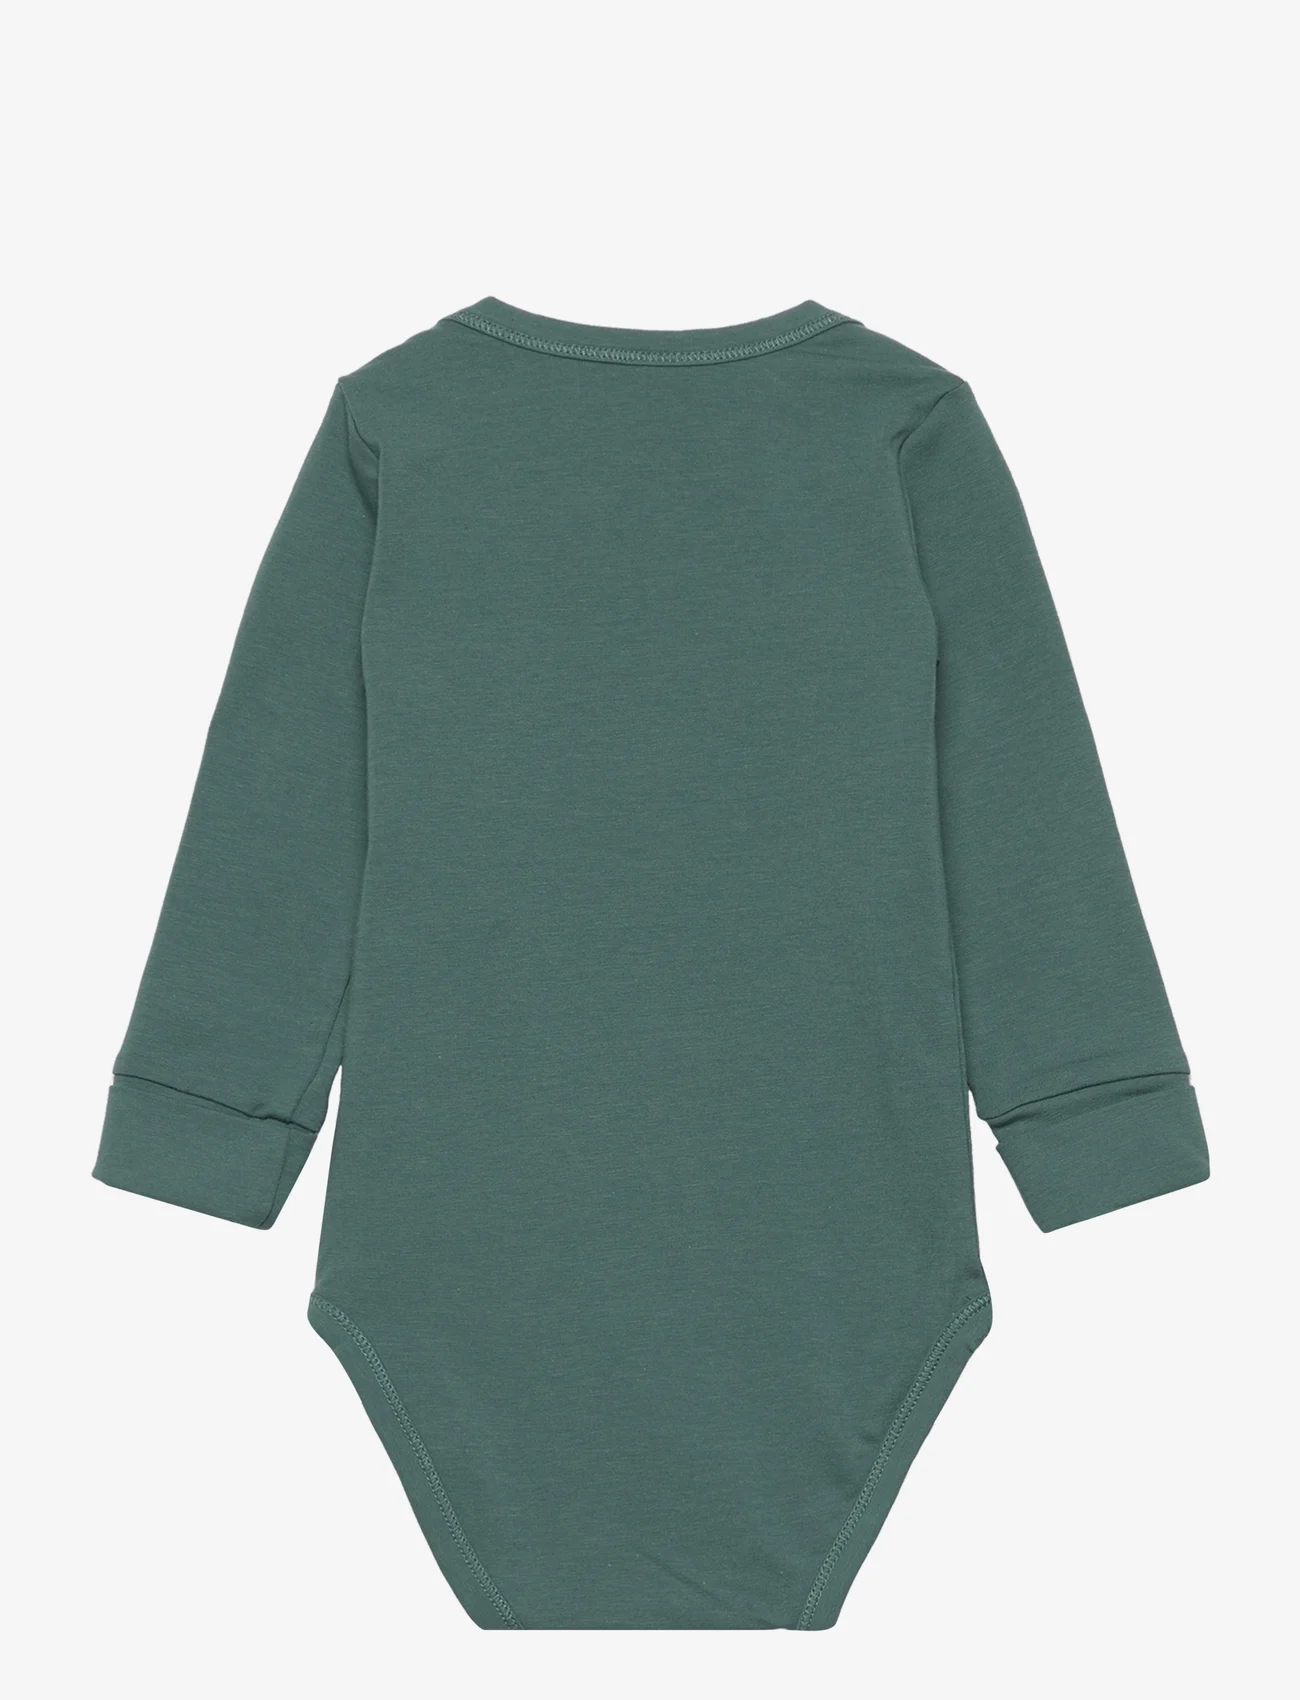 Müsli by Green Cotton - Cozy me l/s body - long-sleeved - pine - 1